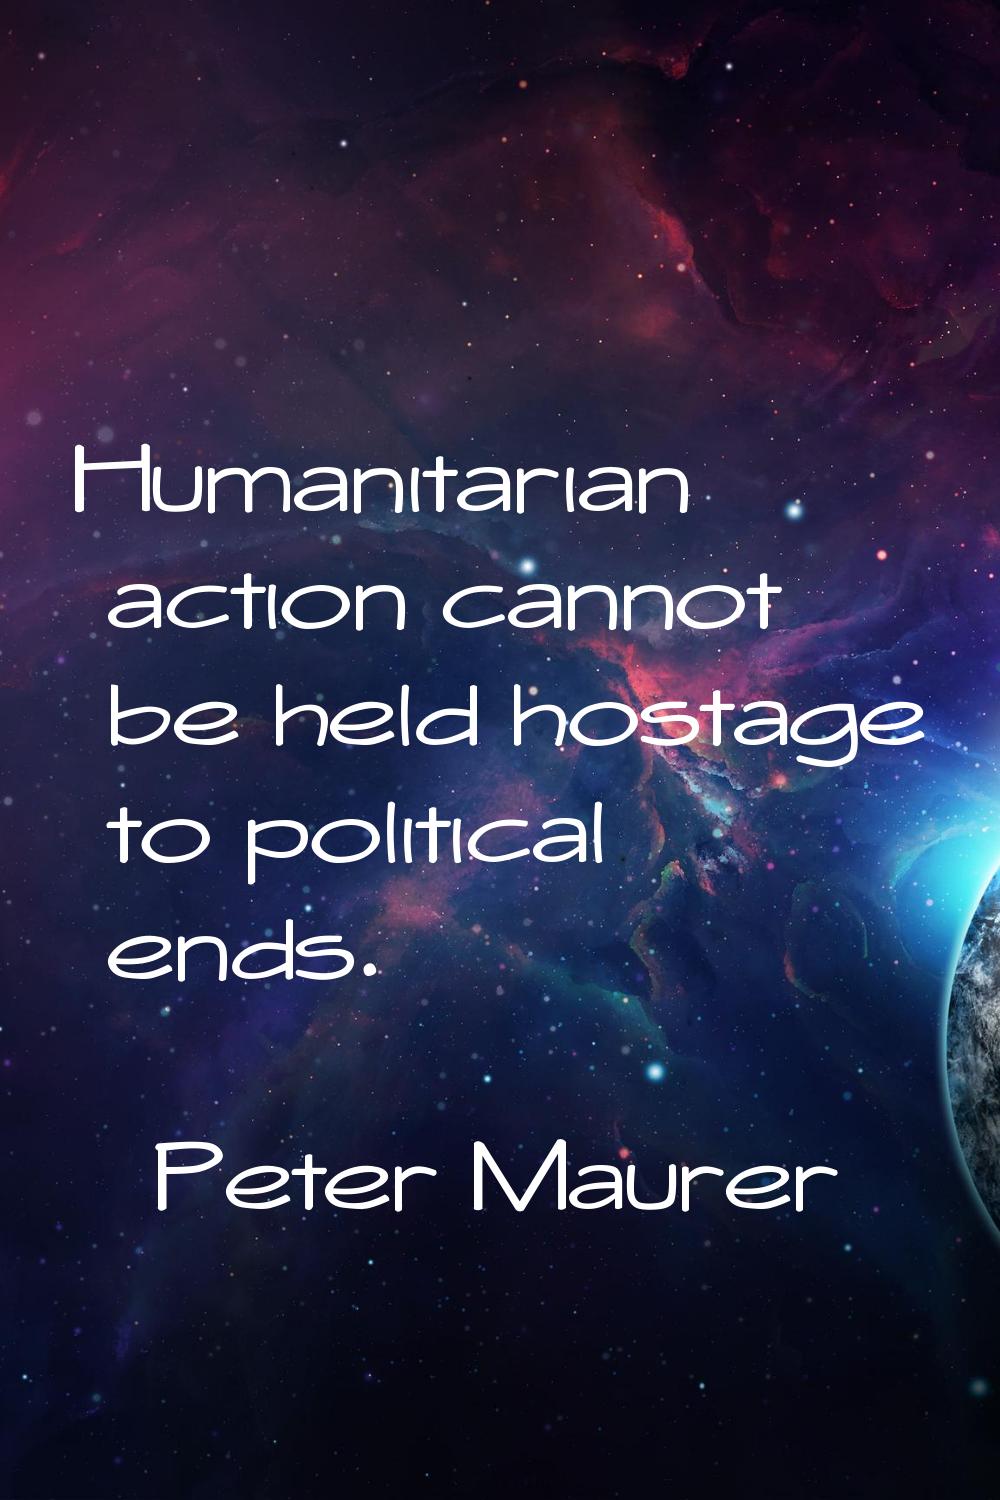 Humanitarian action cannot be held hostage to political ends.